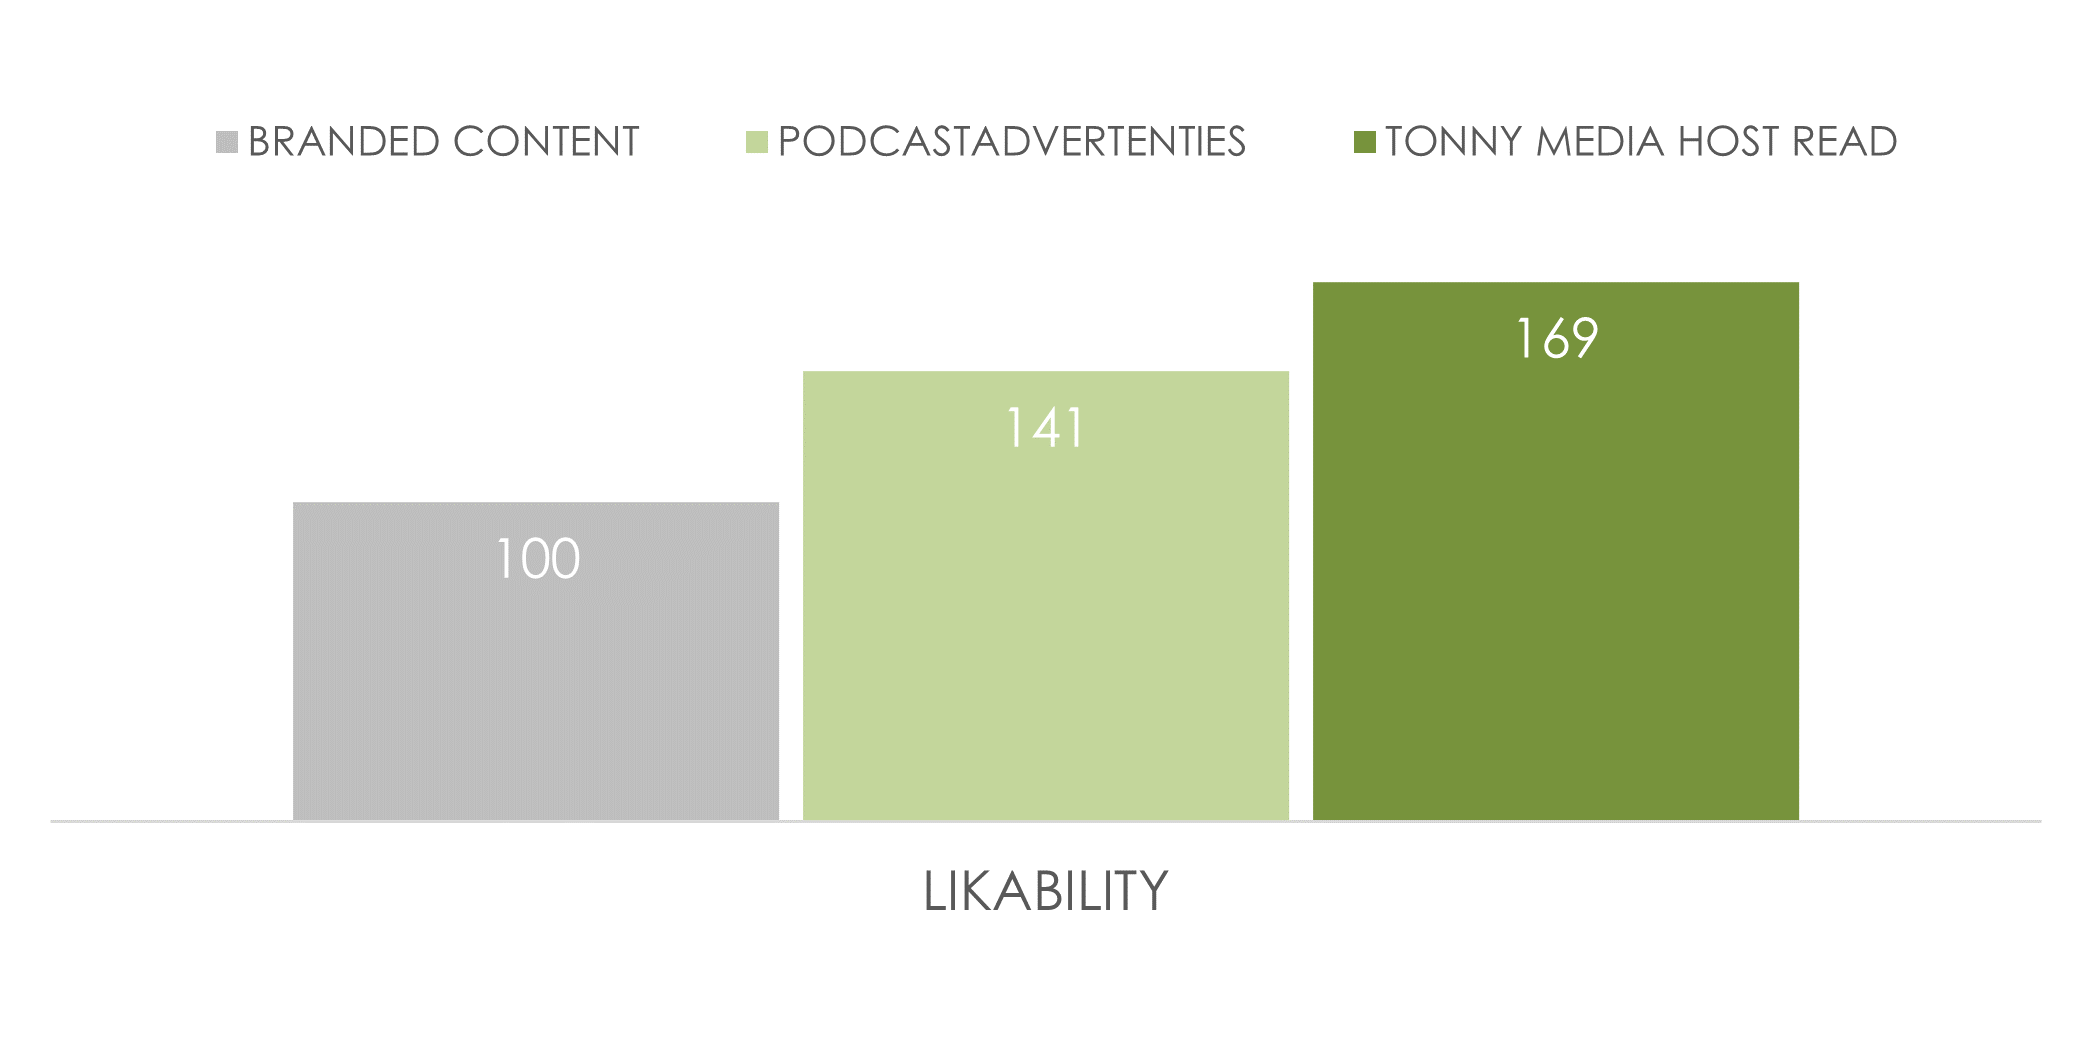 Figure 3: Tonny Media's performance compared to the branded content benchmark